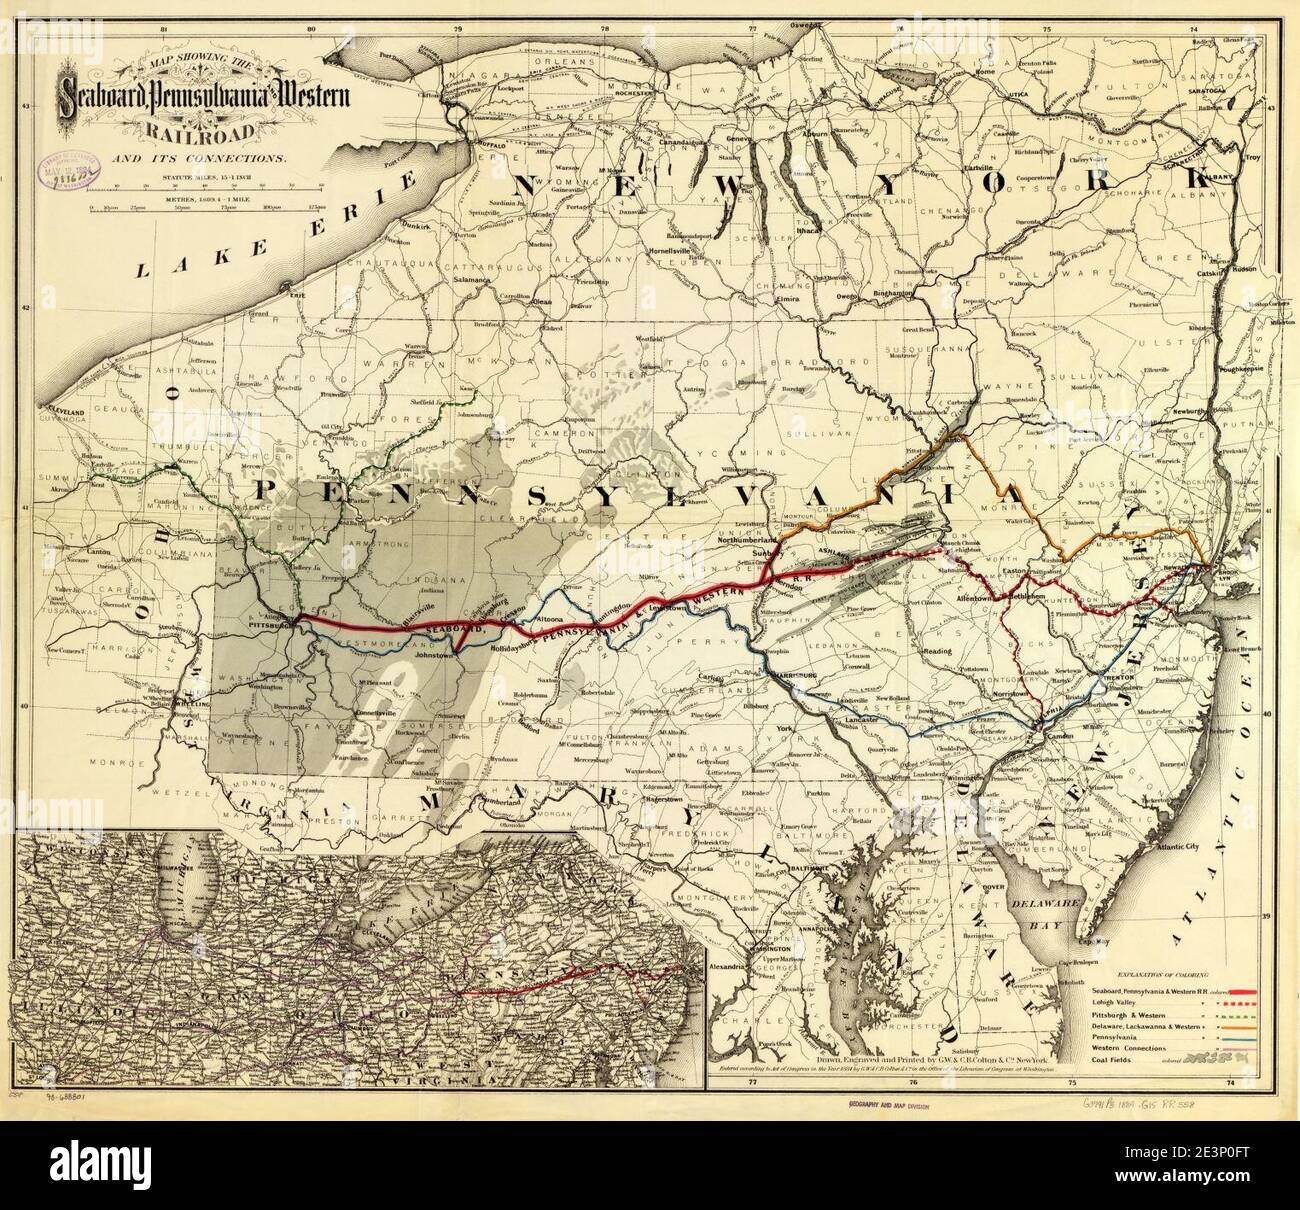 Map showing the Seaboard, Pennsylvania and Western Railroad and its connections. Stock Photo